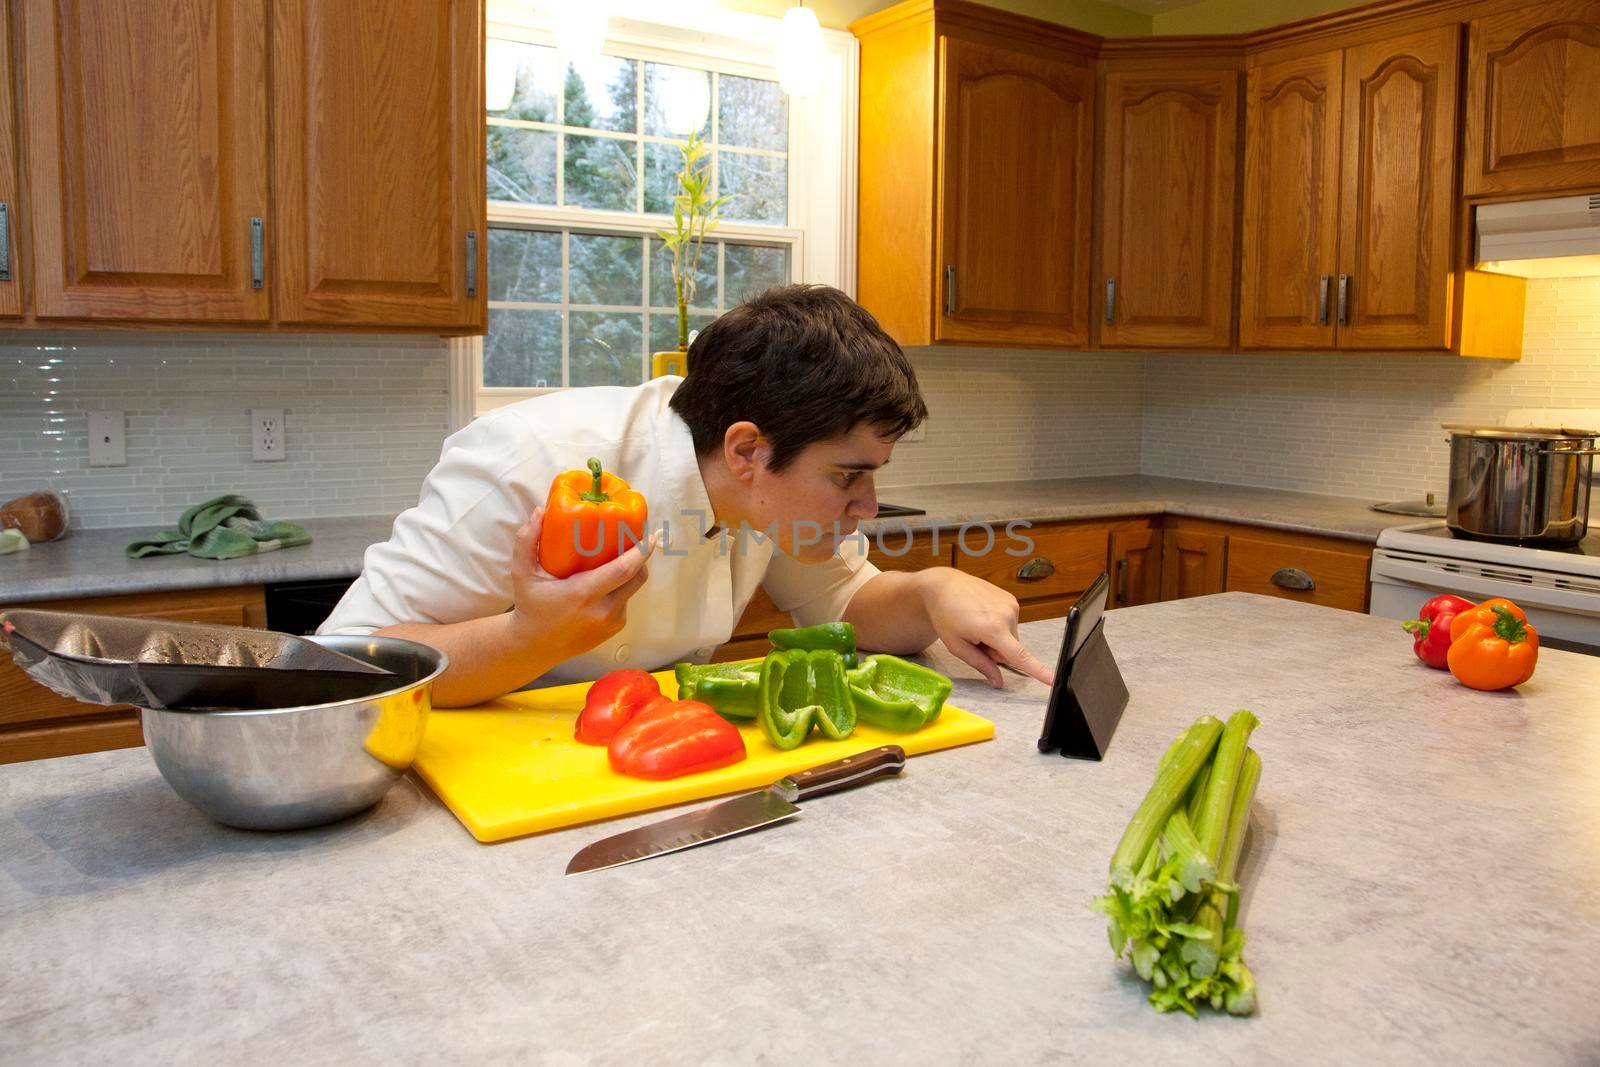 Chef in the kitchen holds a bell pepper and double checks ingredients or instructions on their tablet